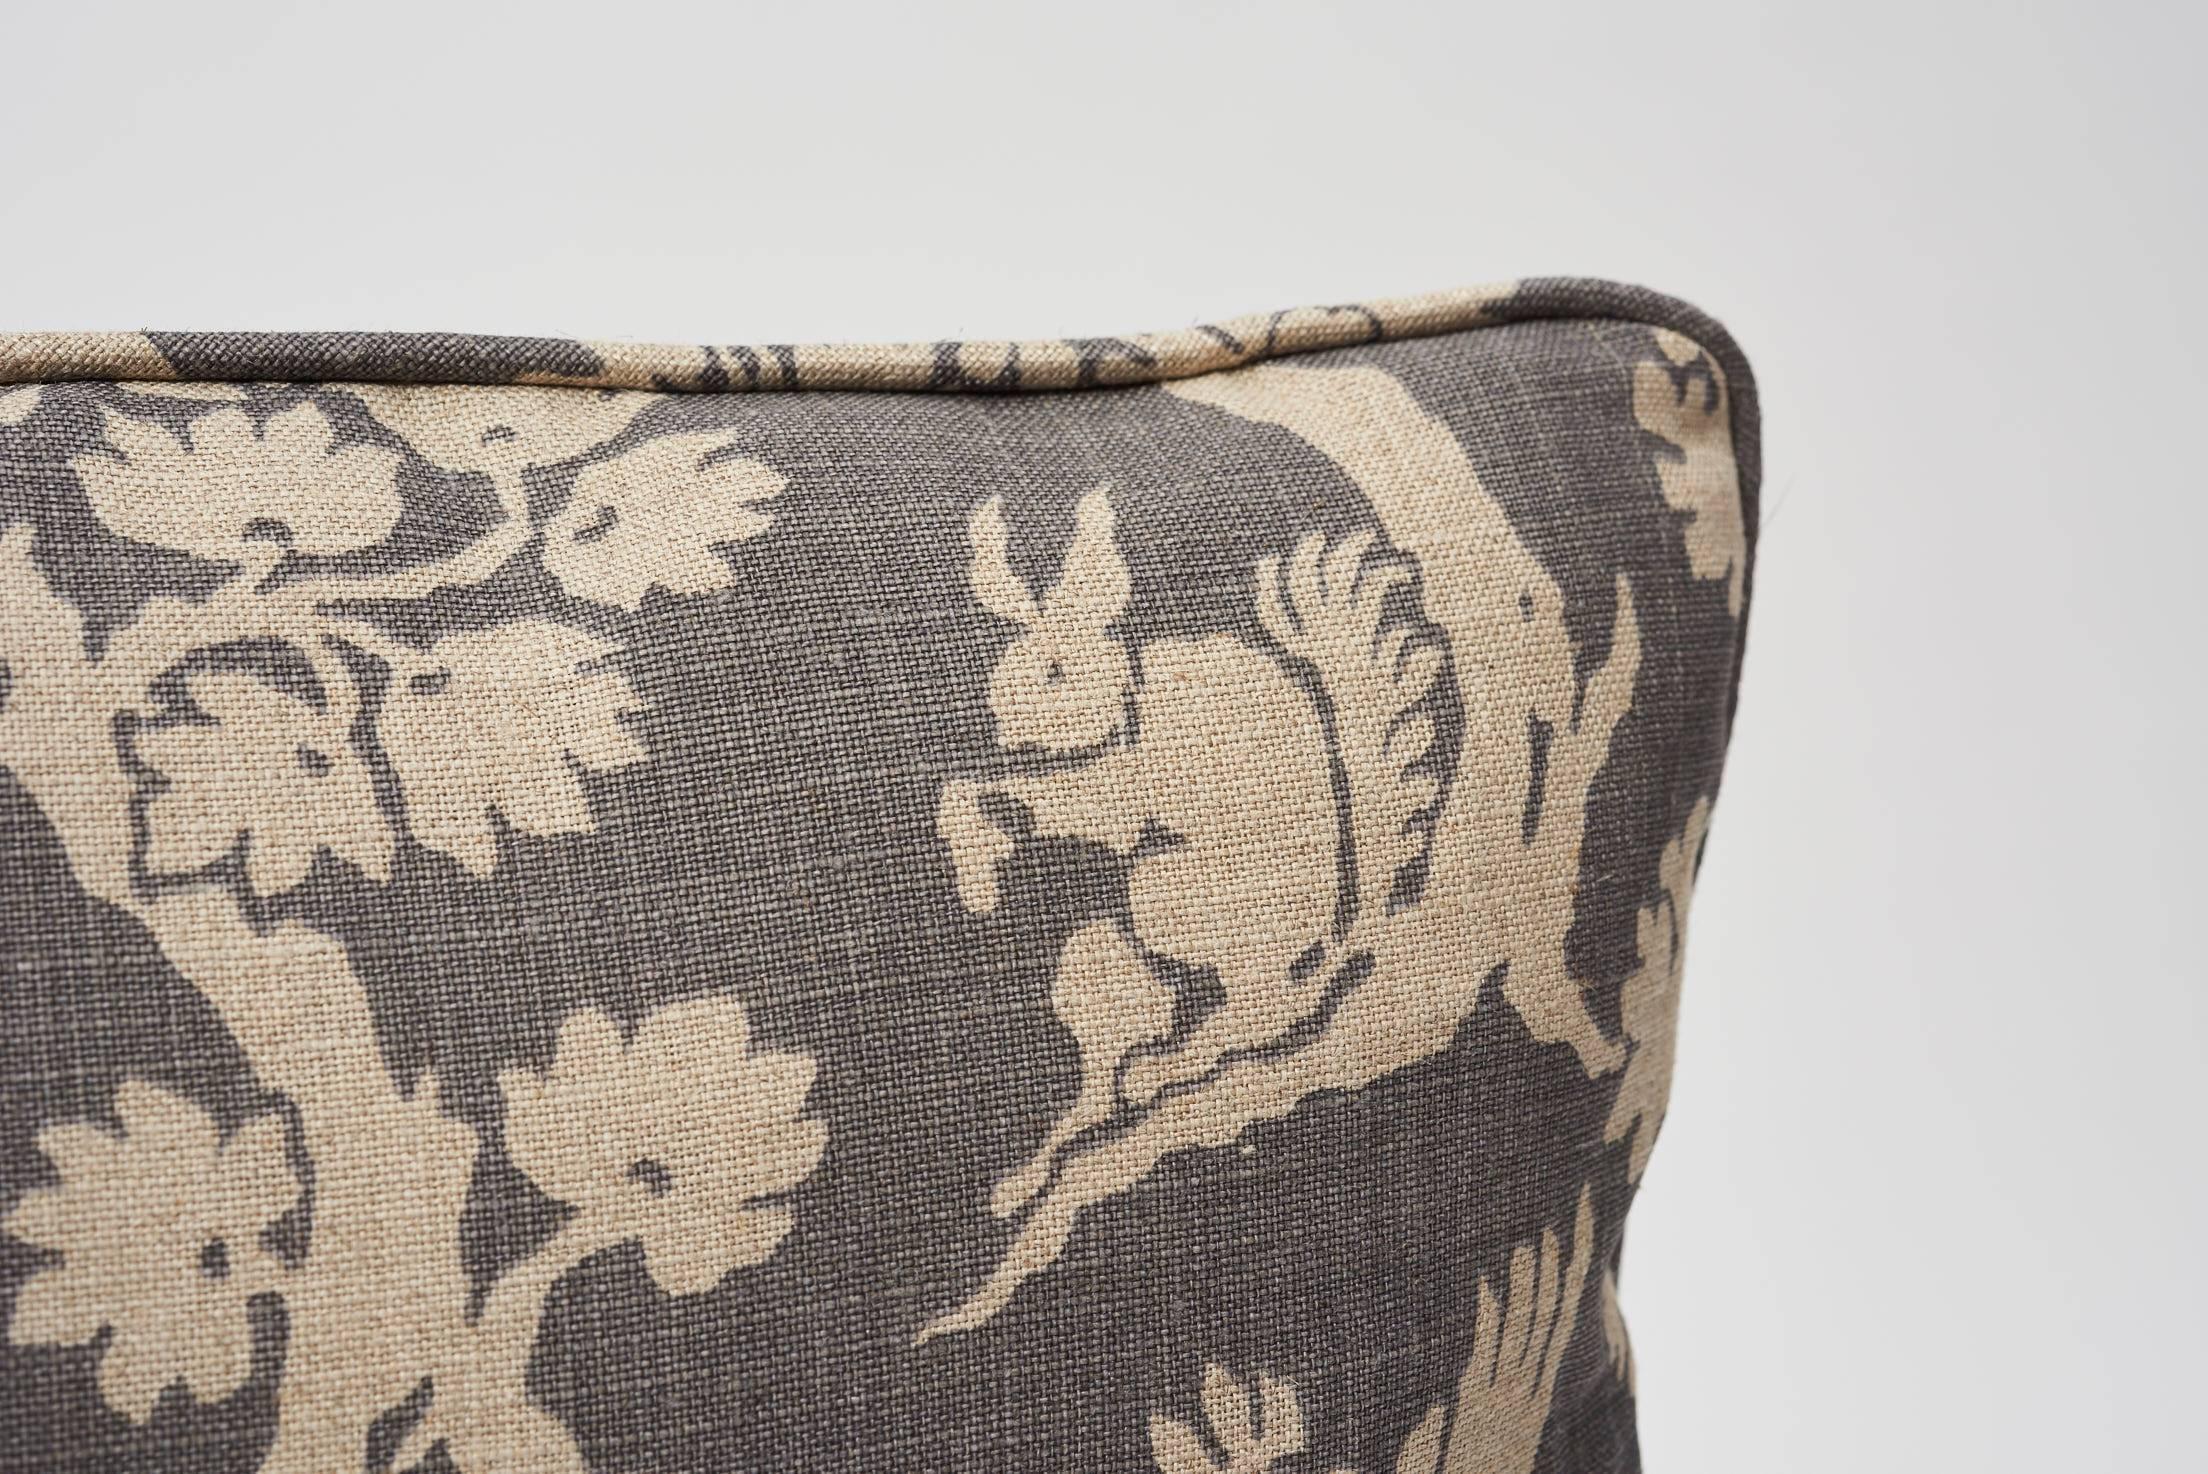 A charming of-the-moment print, Woodland Silhouette is inspired by an early 20th century document. It is printed on a slubbed linen that gives it a lovely antique quality. Featured as a Schumacher decorative accent, this is sure to timelessly